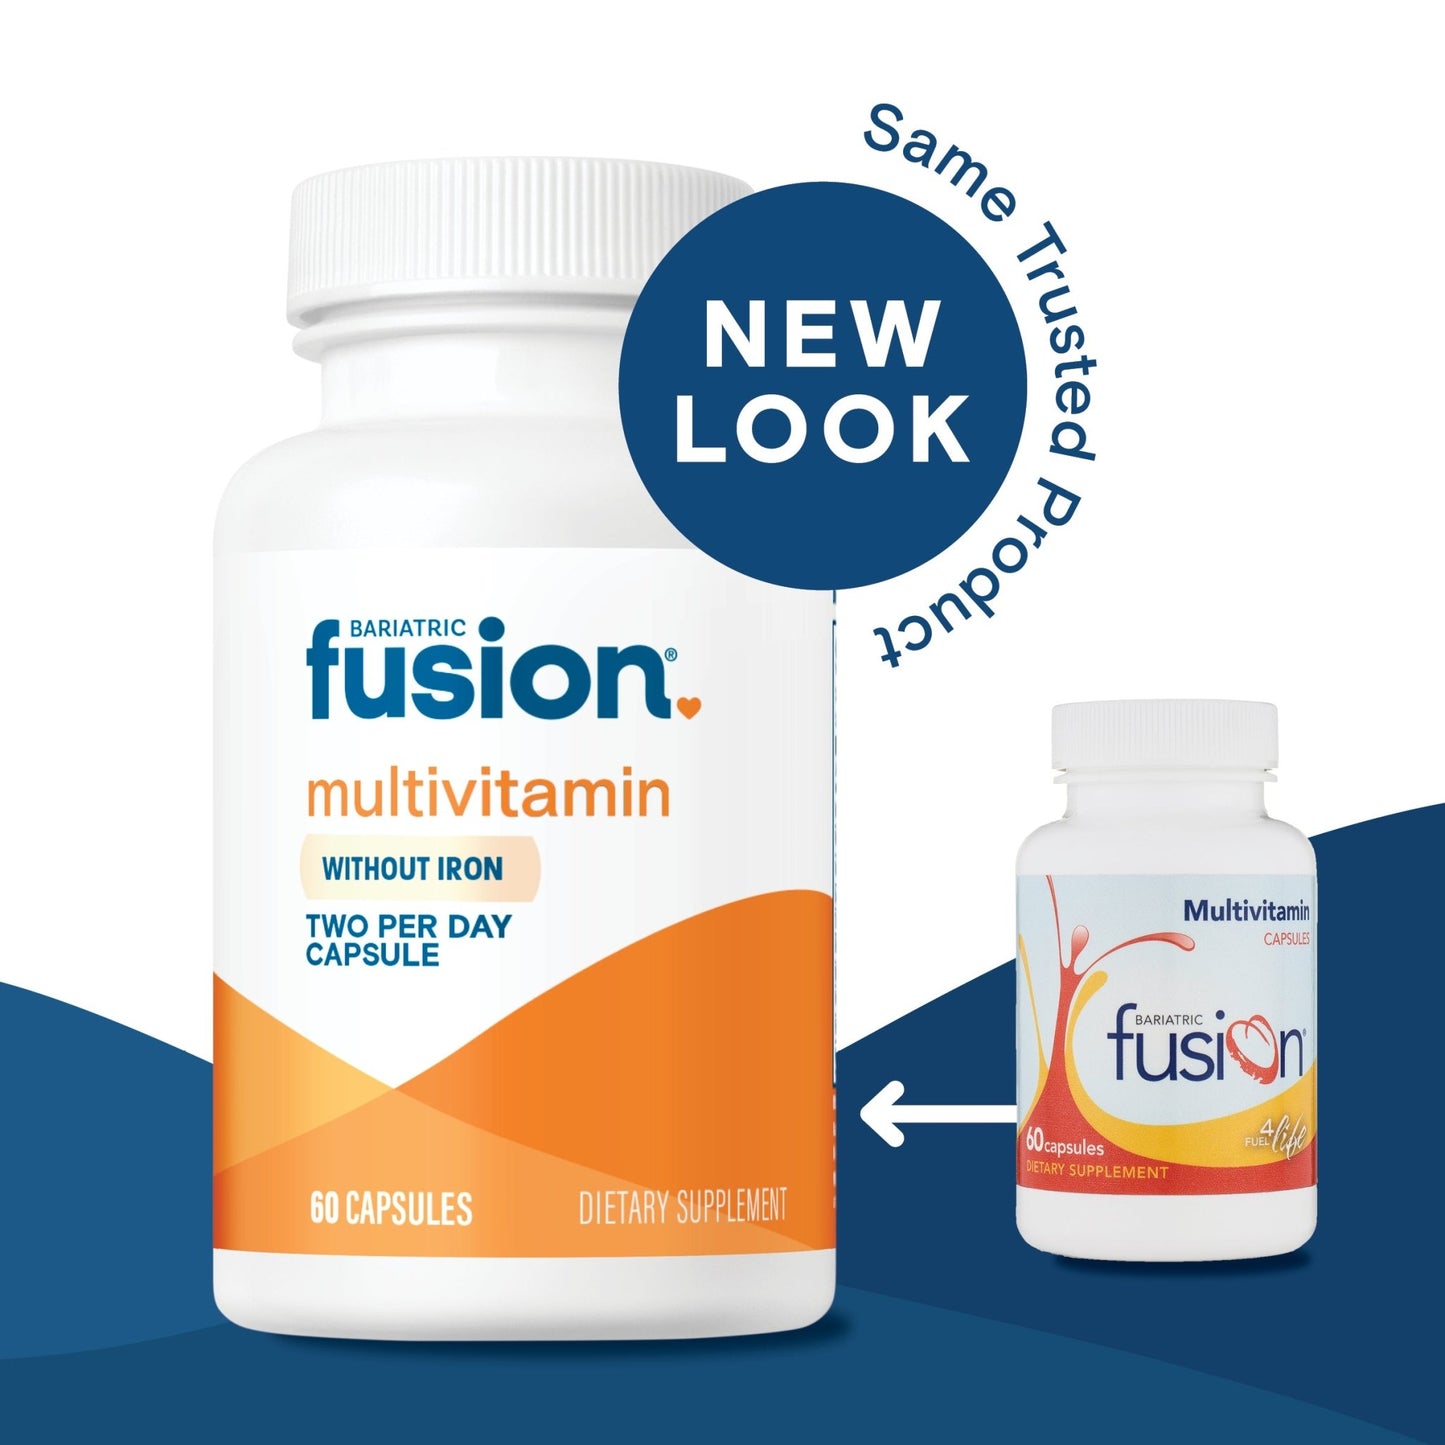 Bariatric Multivitamin Capsule without Iron 60 capsules new look, same trusted product.